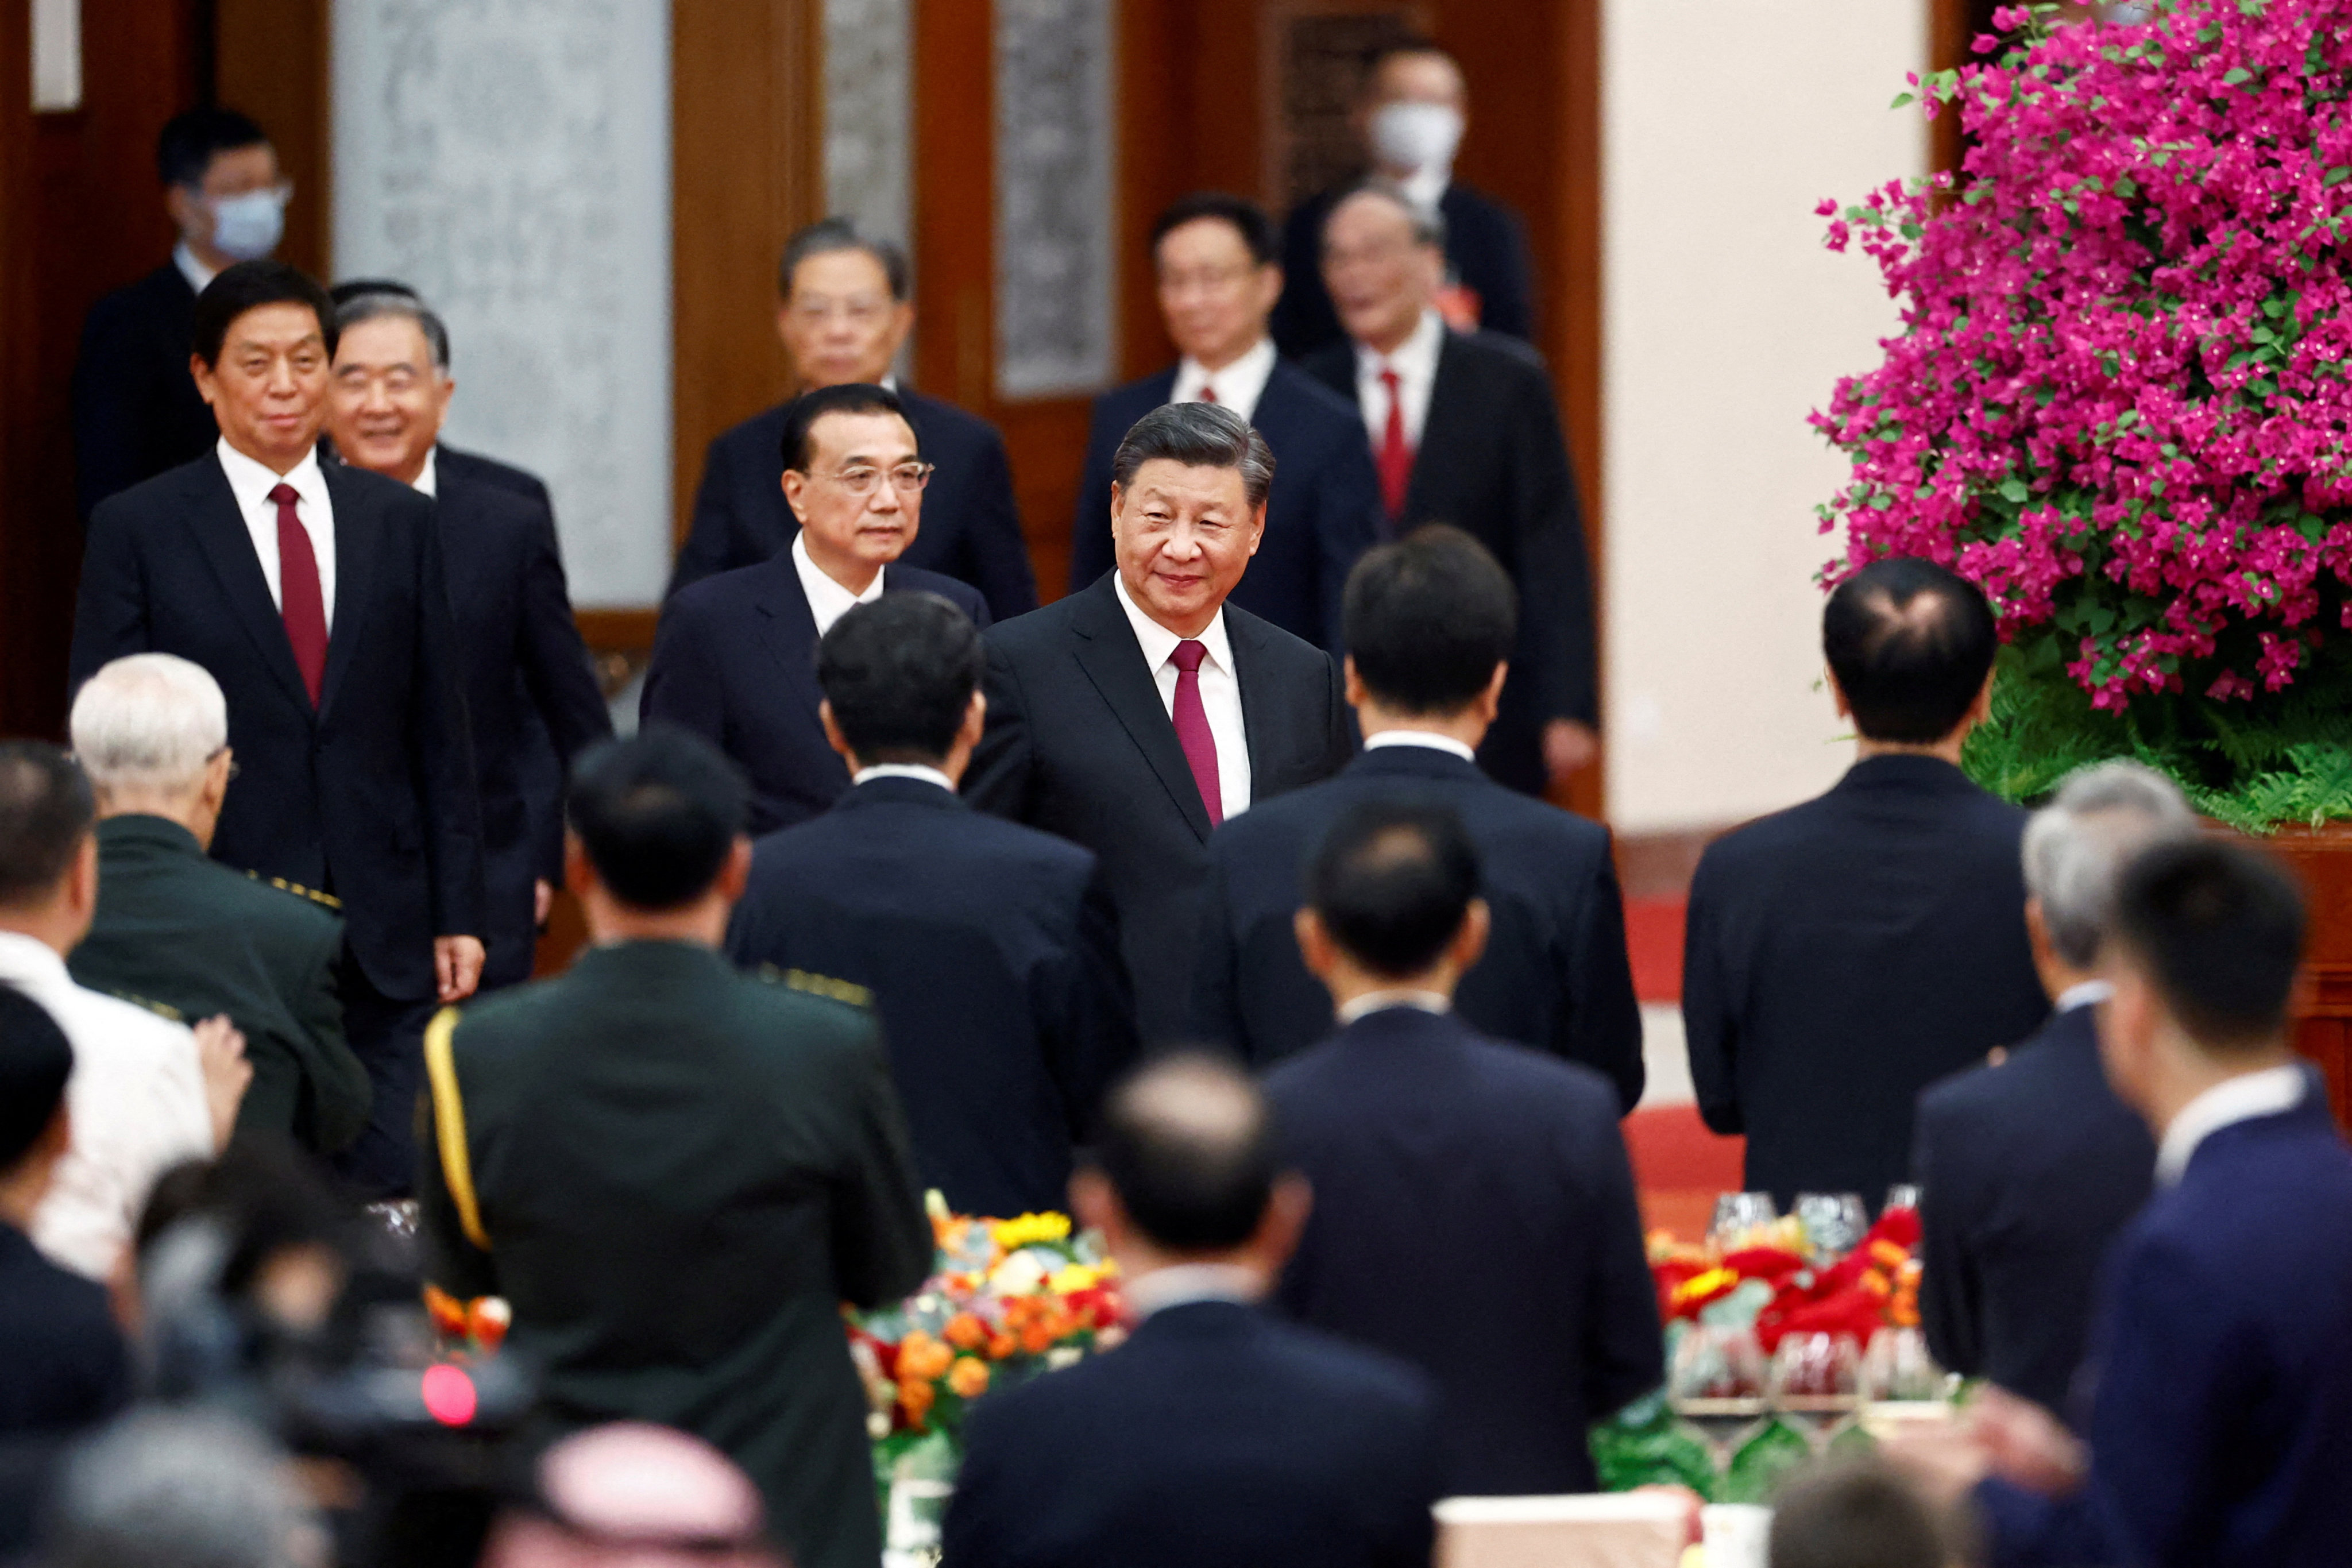 With the 20th party congress fast approaching, party ideologists have been busy promoting the policies and governing philosophy of Xi Jinping, who is set to be elected for a historic third term as secretary general of the Communist Party. Photo: Reuters